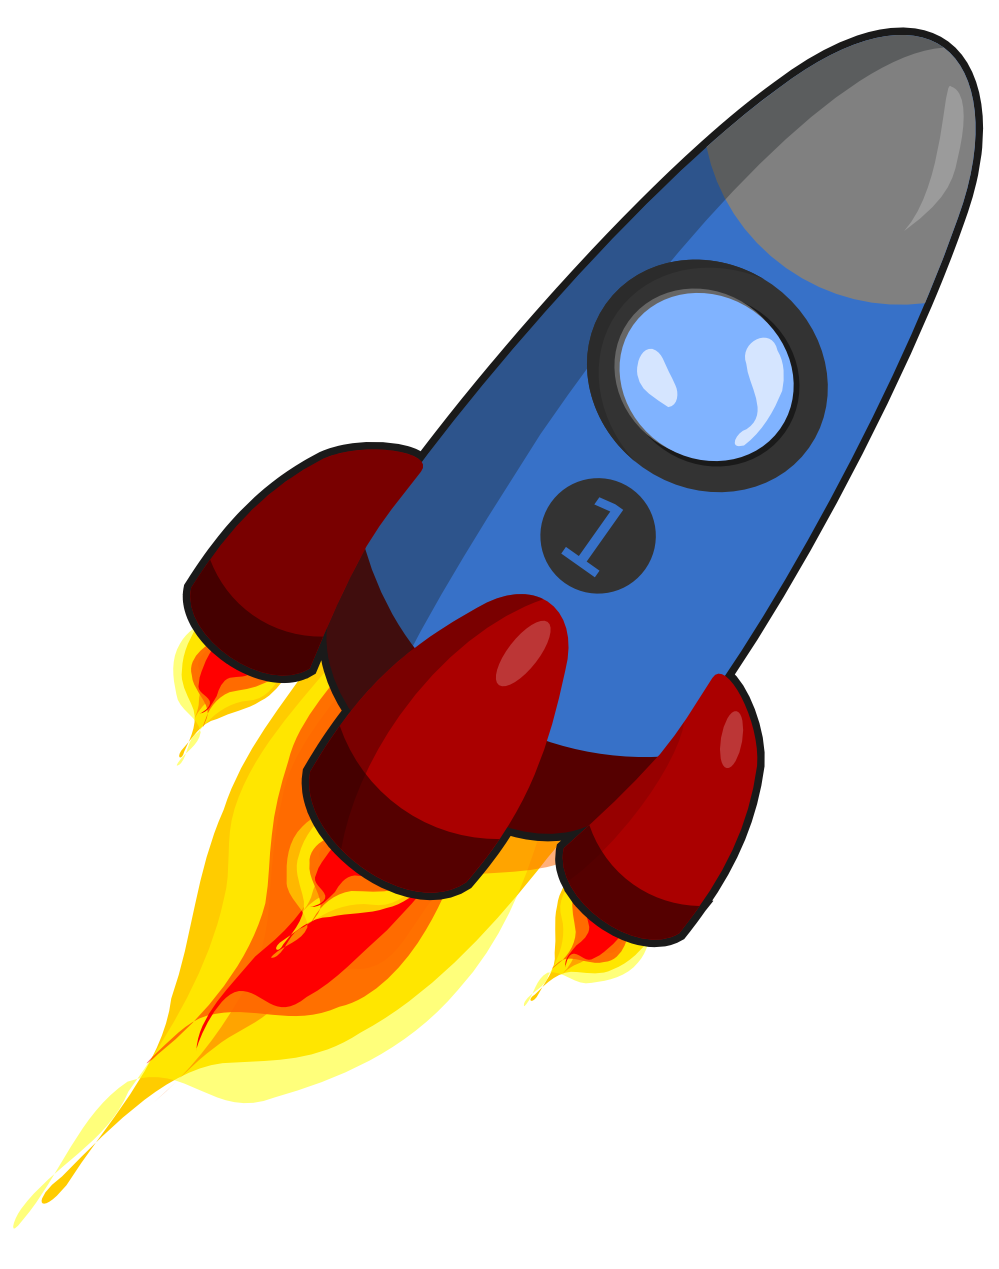 Rocket Blue and Red Christmas Xmas Electronics Toy Coloring Book ...